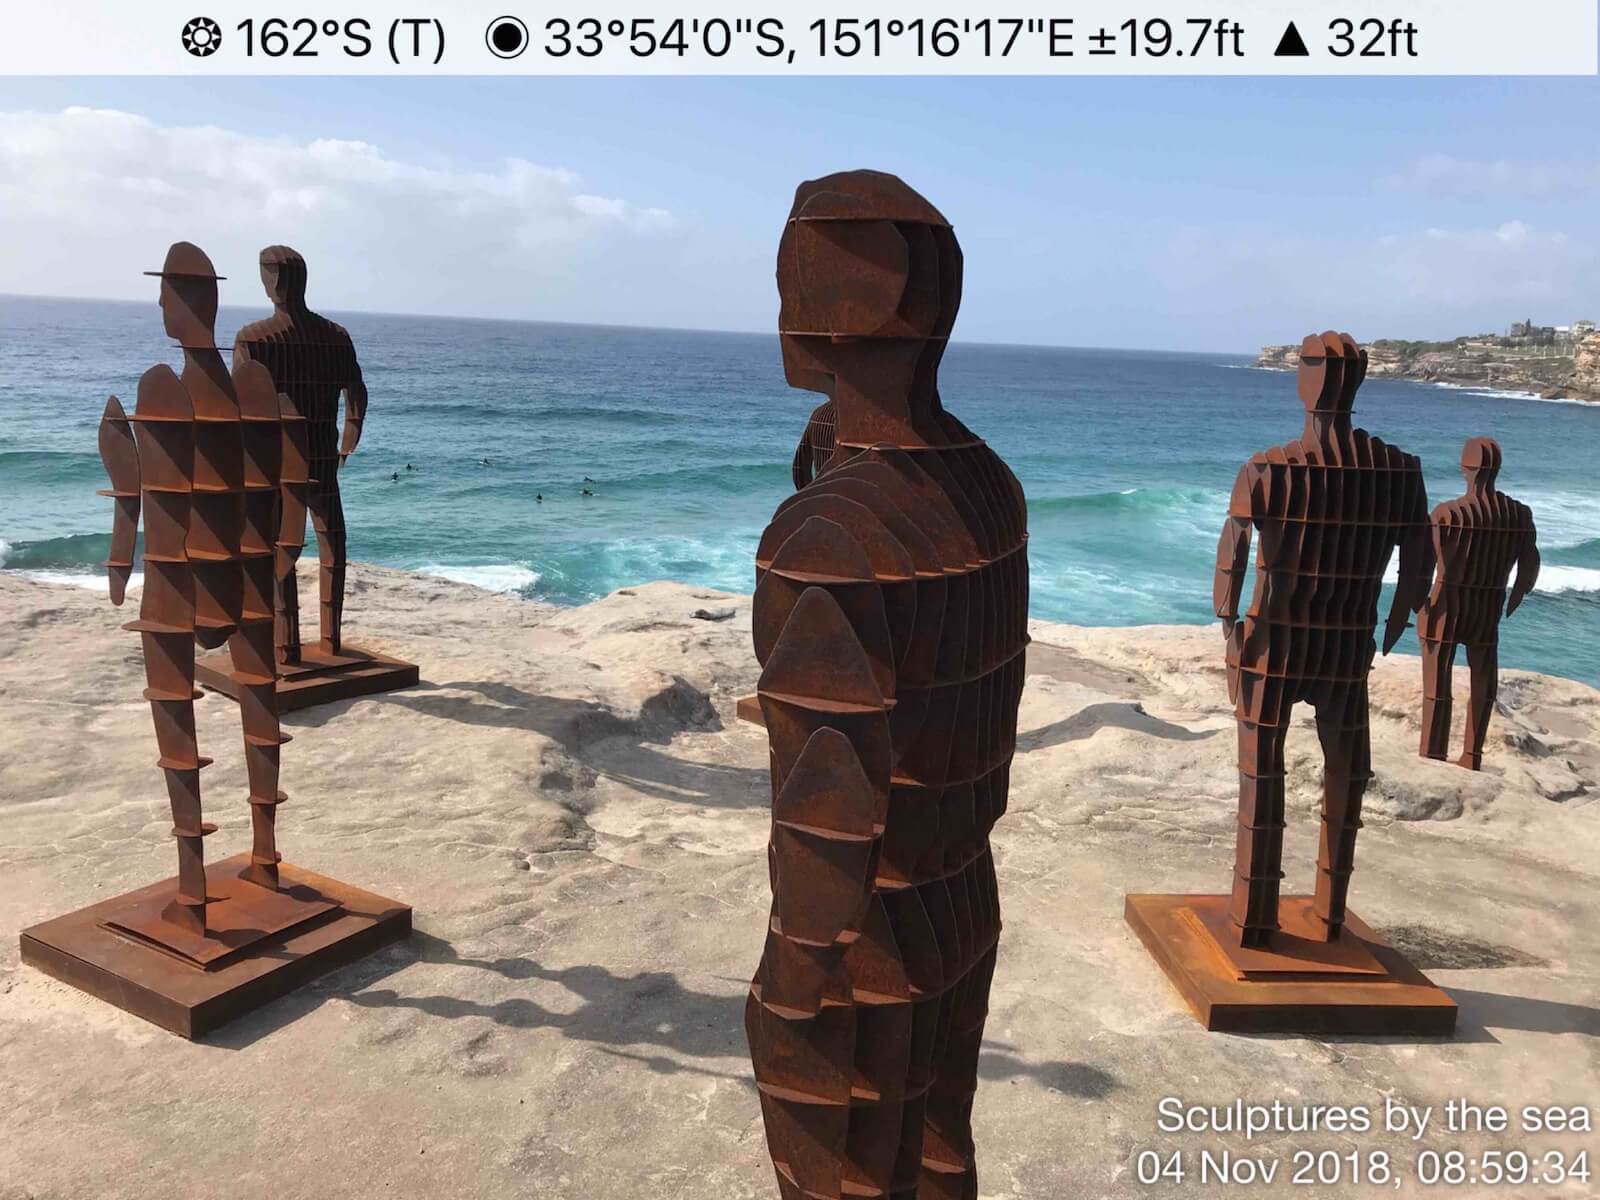 Sculptures by the sea.